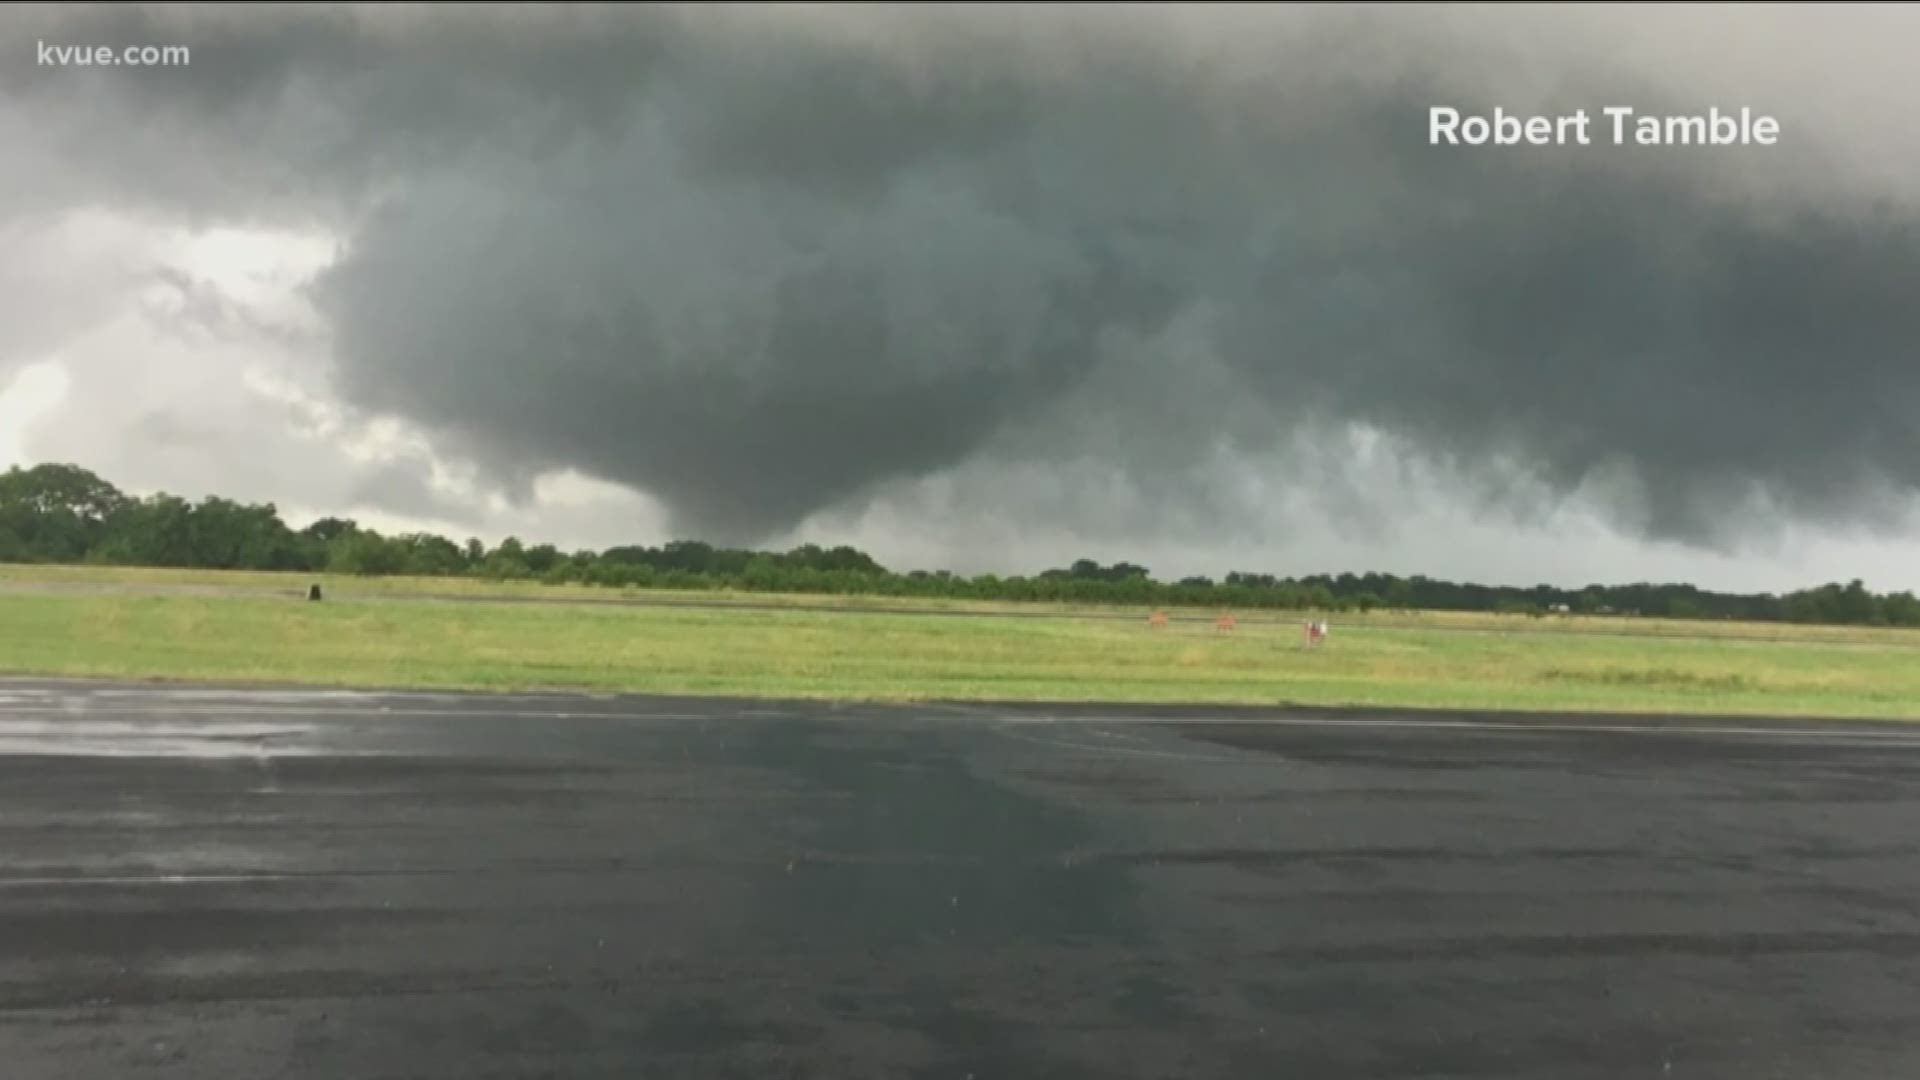 One tornado was confirmed near Smithville and the other in Upton.